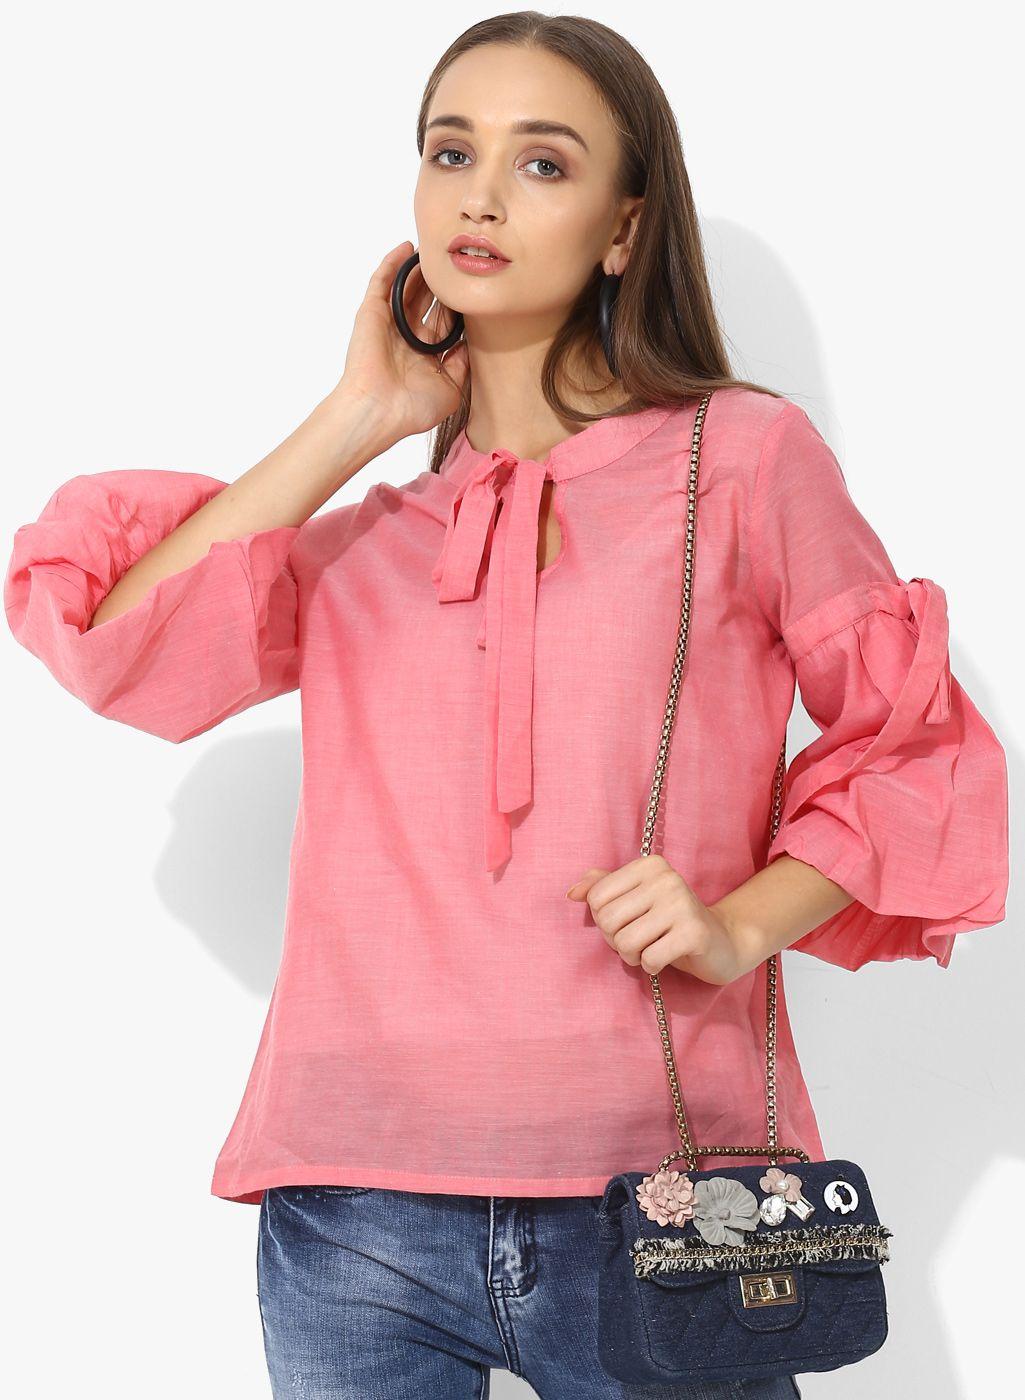 miaminx women coral pink sheer puff sleeves solid top